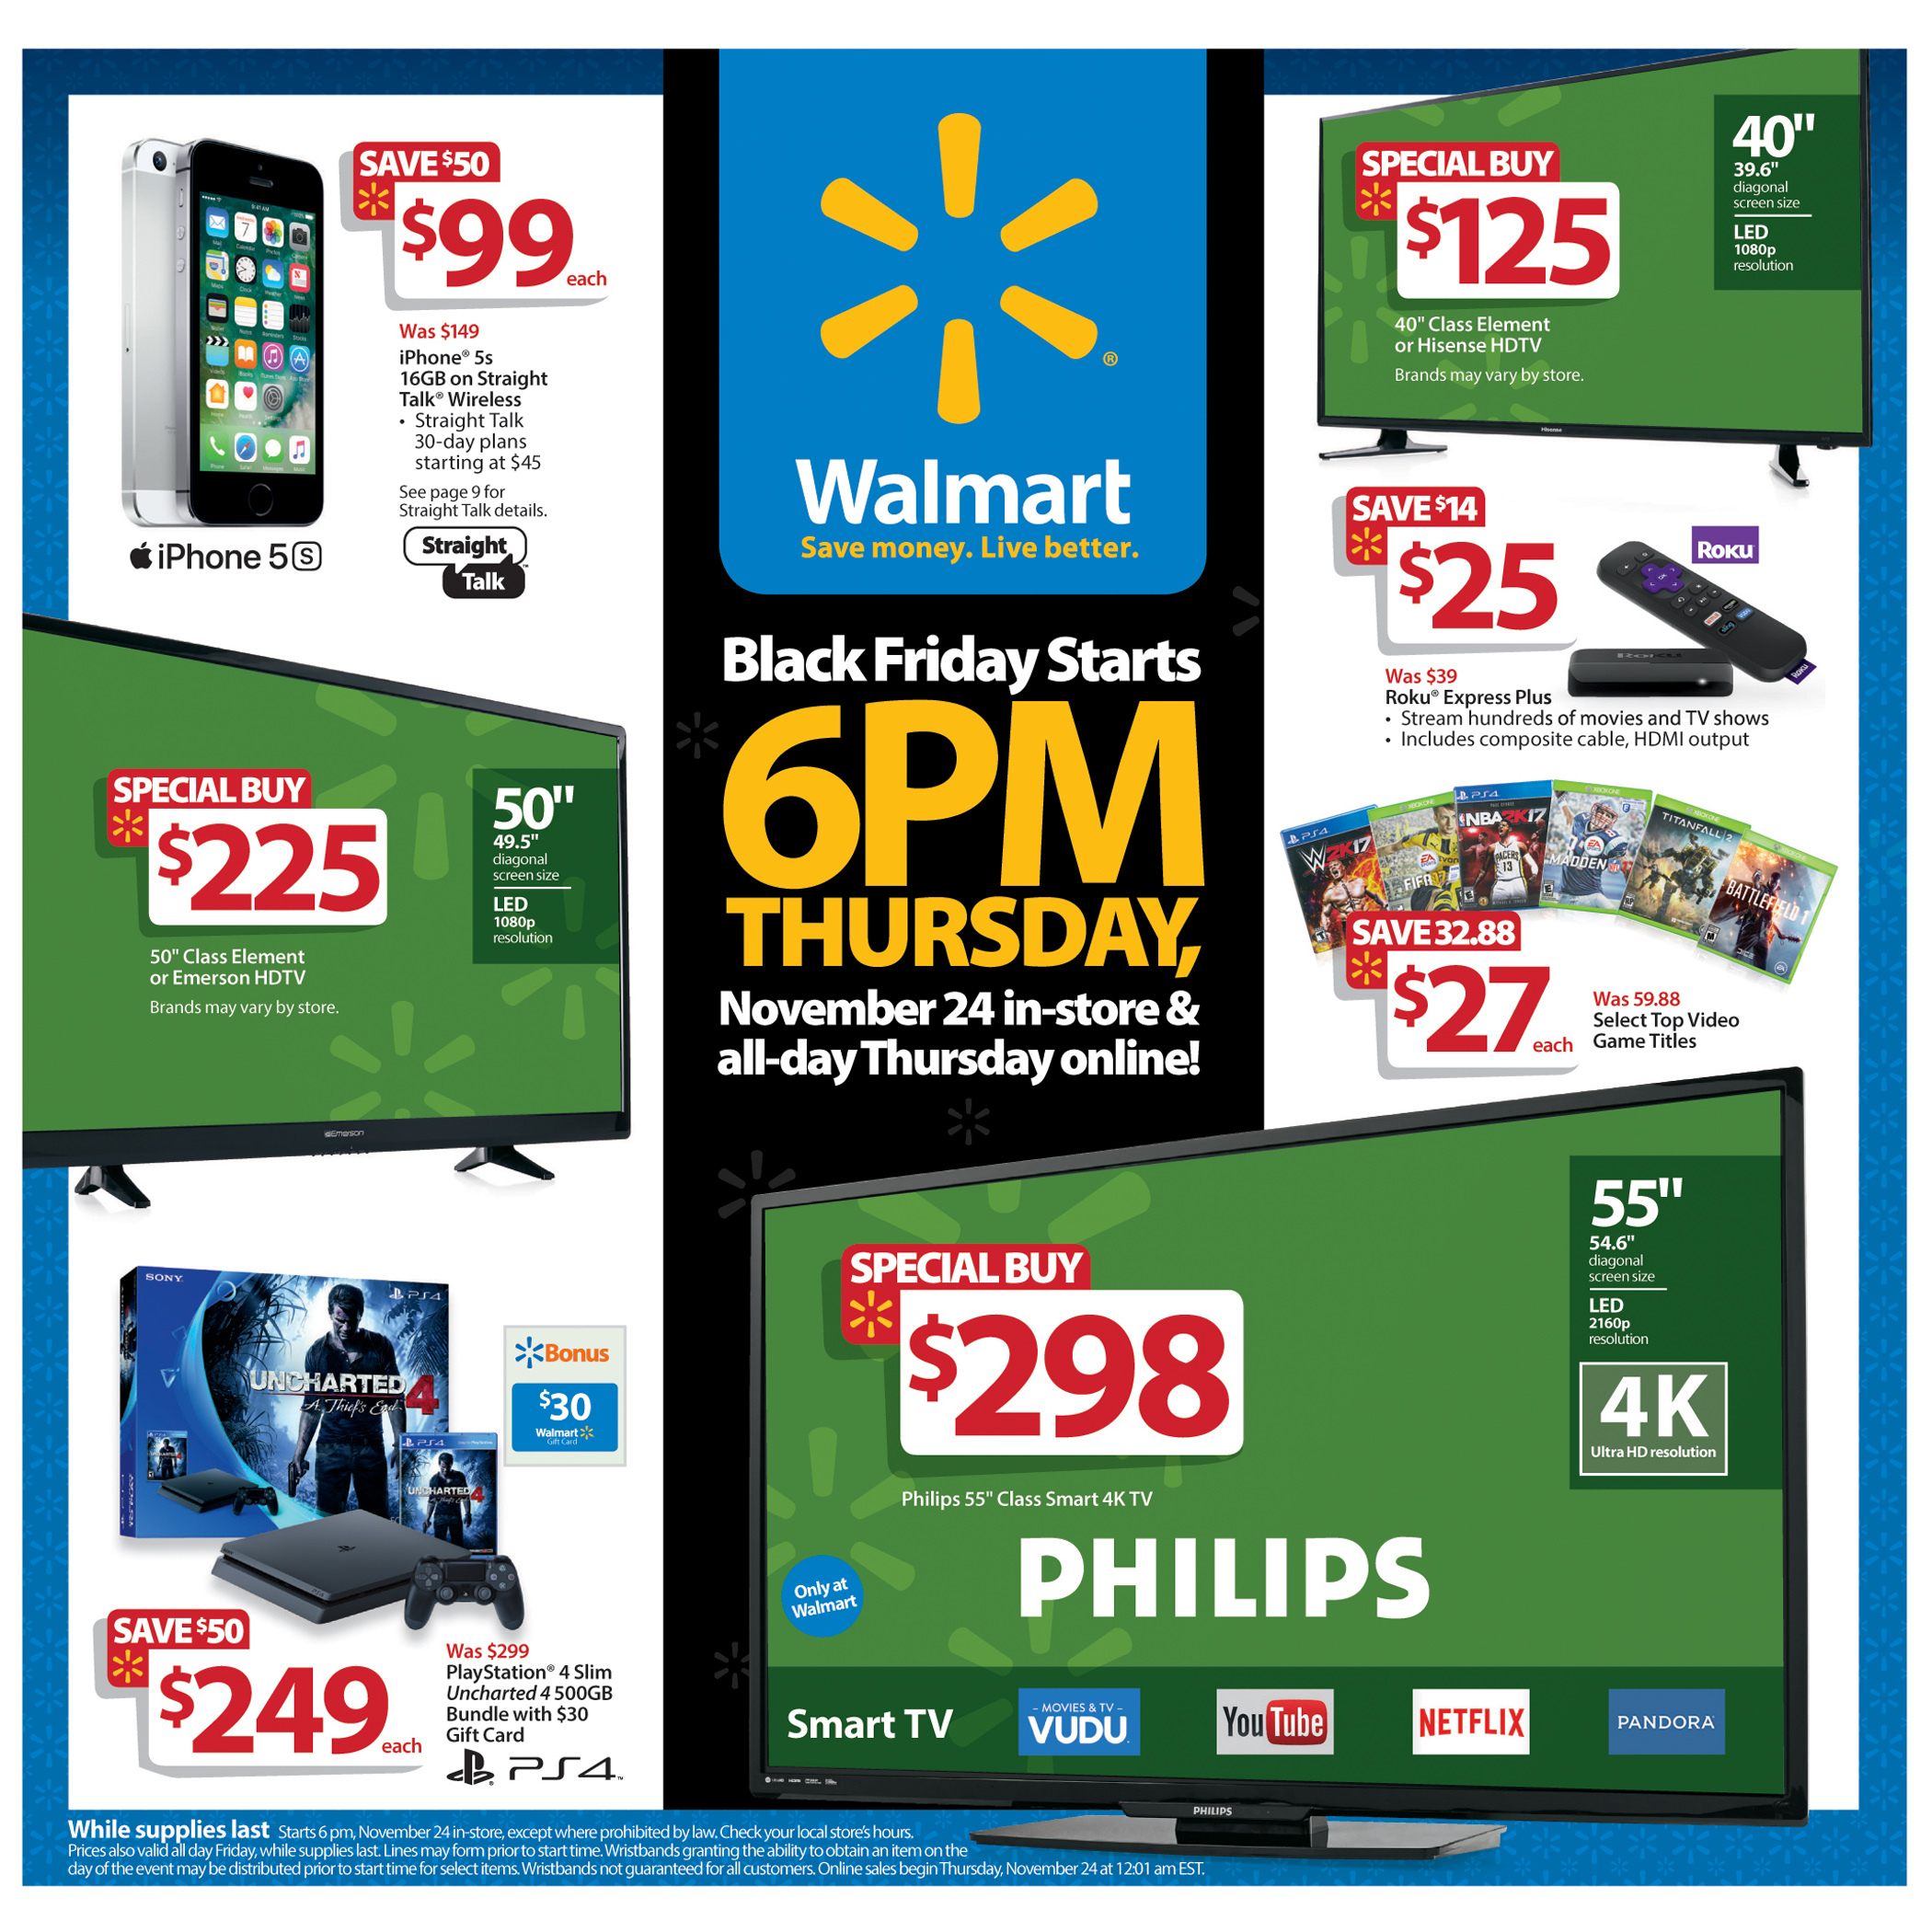 Walmart Unveils Black Friday 2016 Plans Great Deals More Availability Business Wire